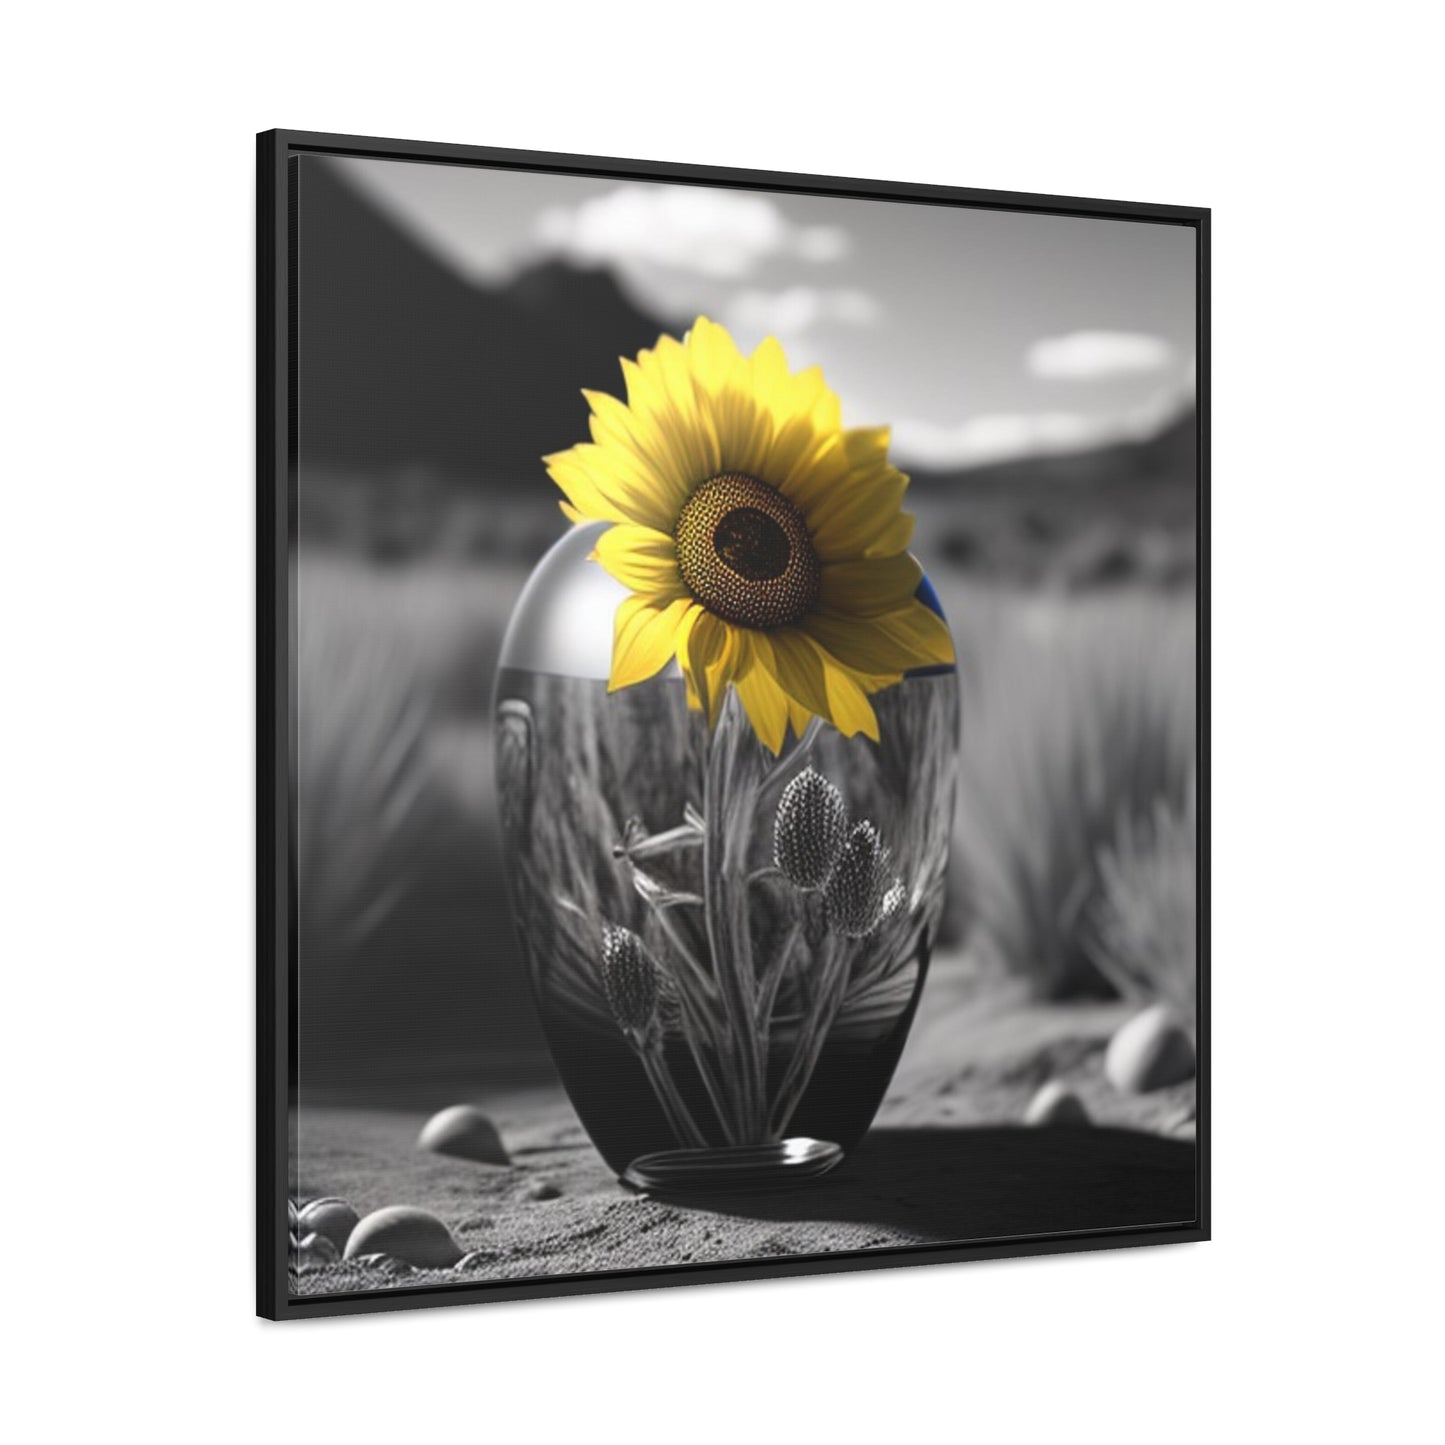 Gallery Canvas Wraps, Square Frame Yellw Sunflower in a vase 3